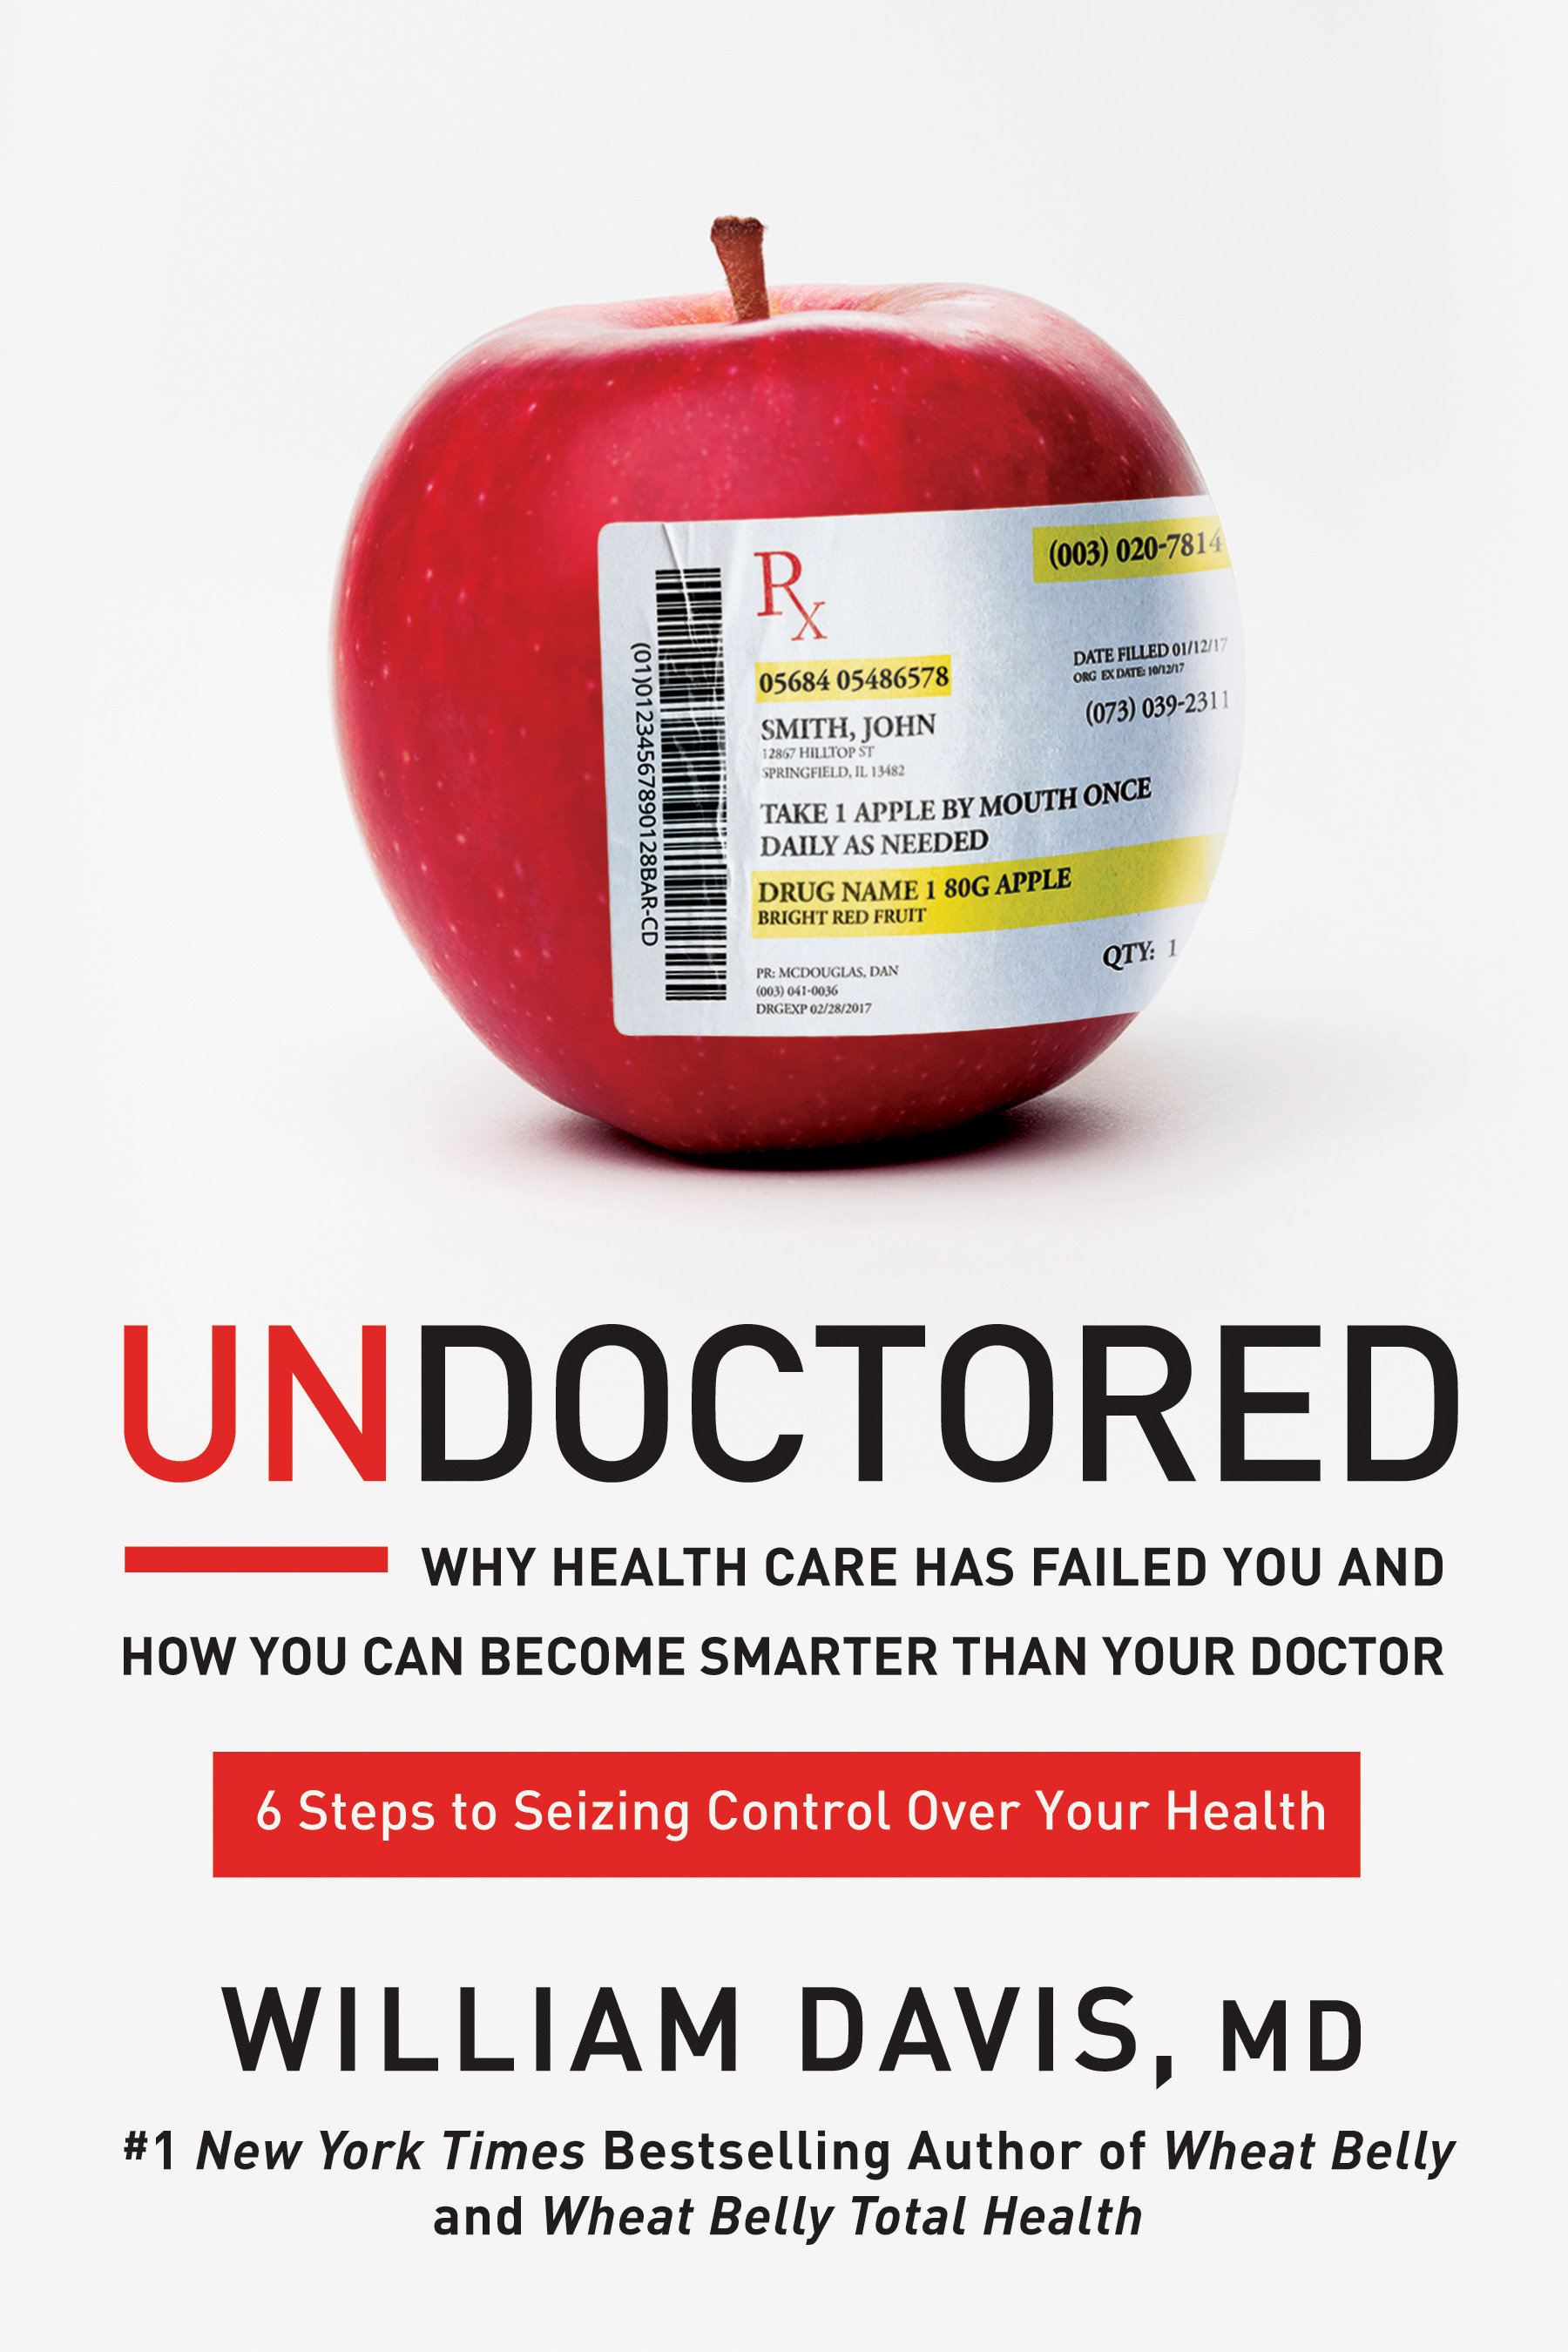 Image de couverture de Undoctored [electronic resource] : Why Health Care Has Failed You and How You Can Become Smarter Than Your Doctor